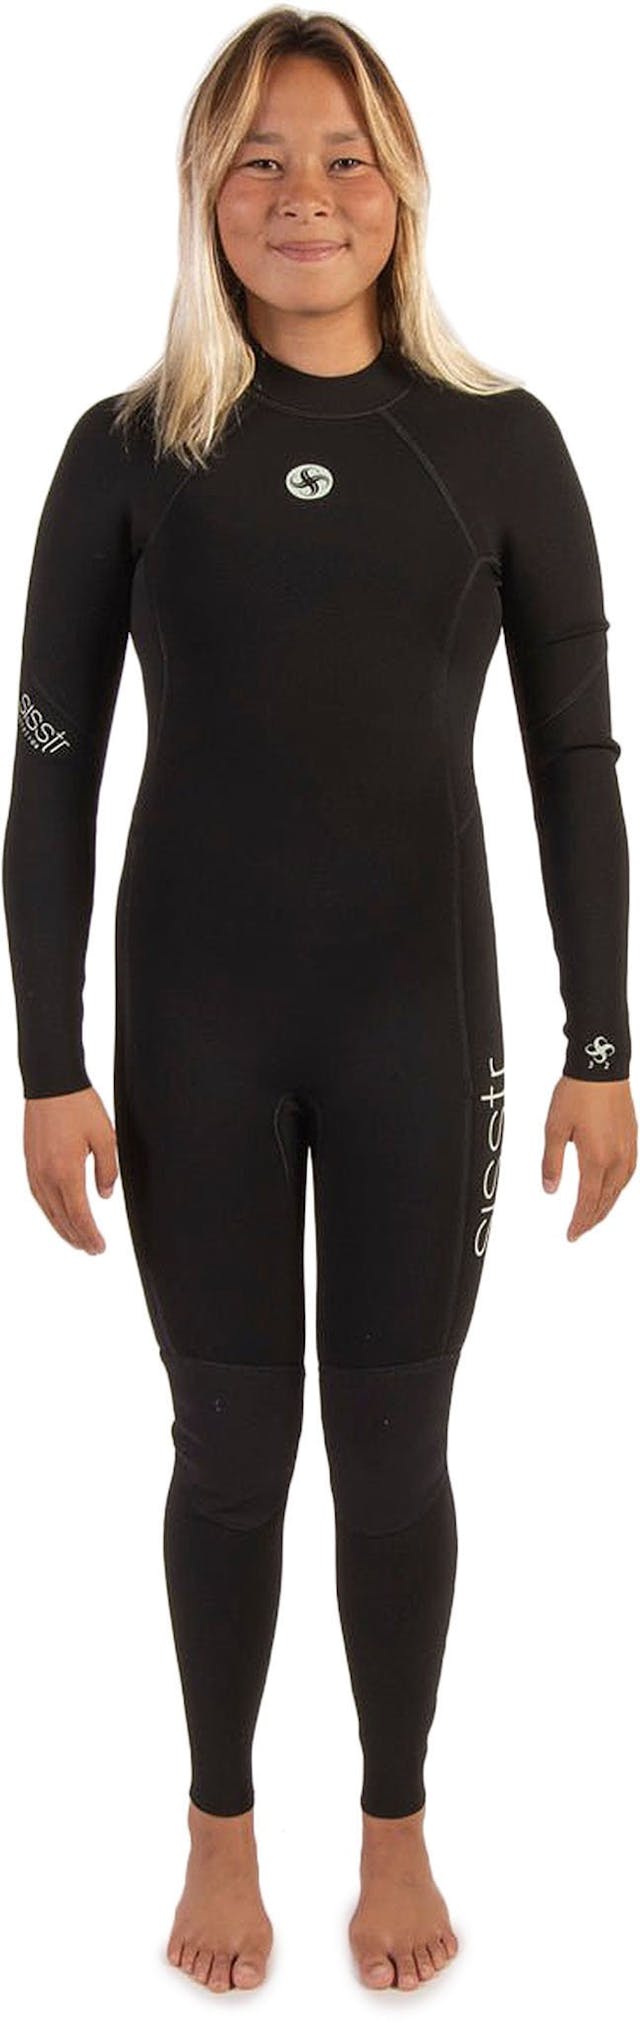 Product image for Seven Seas 4/3 Wetsuit - Youth